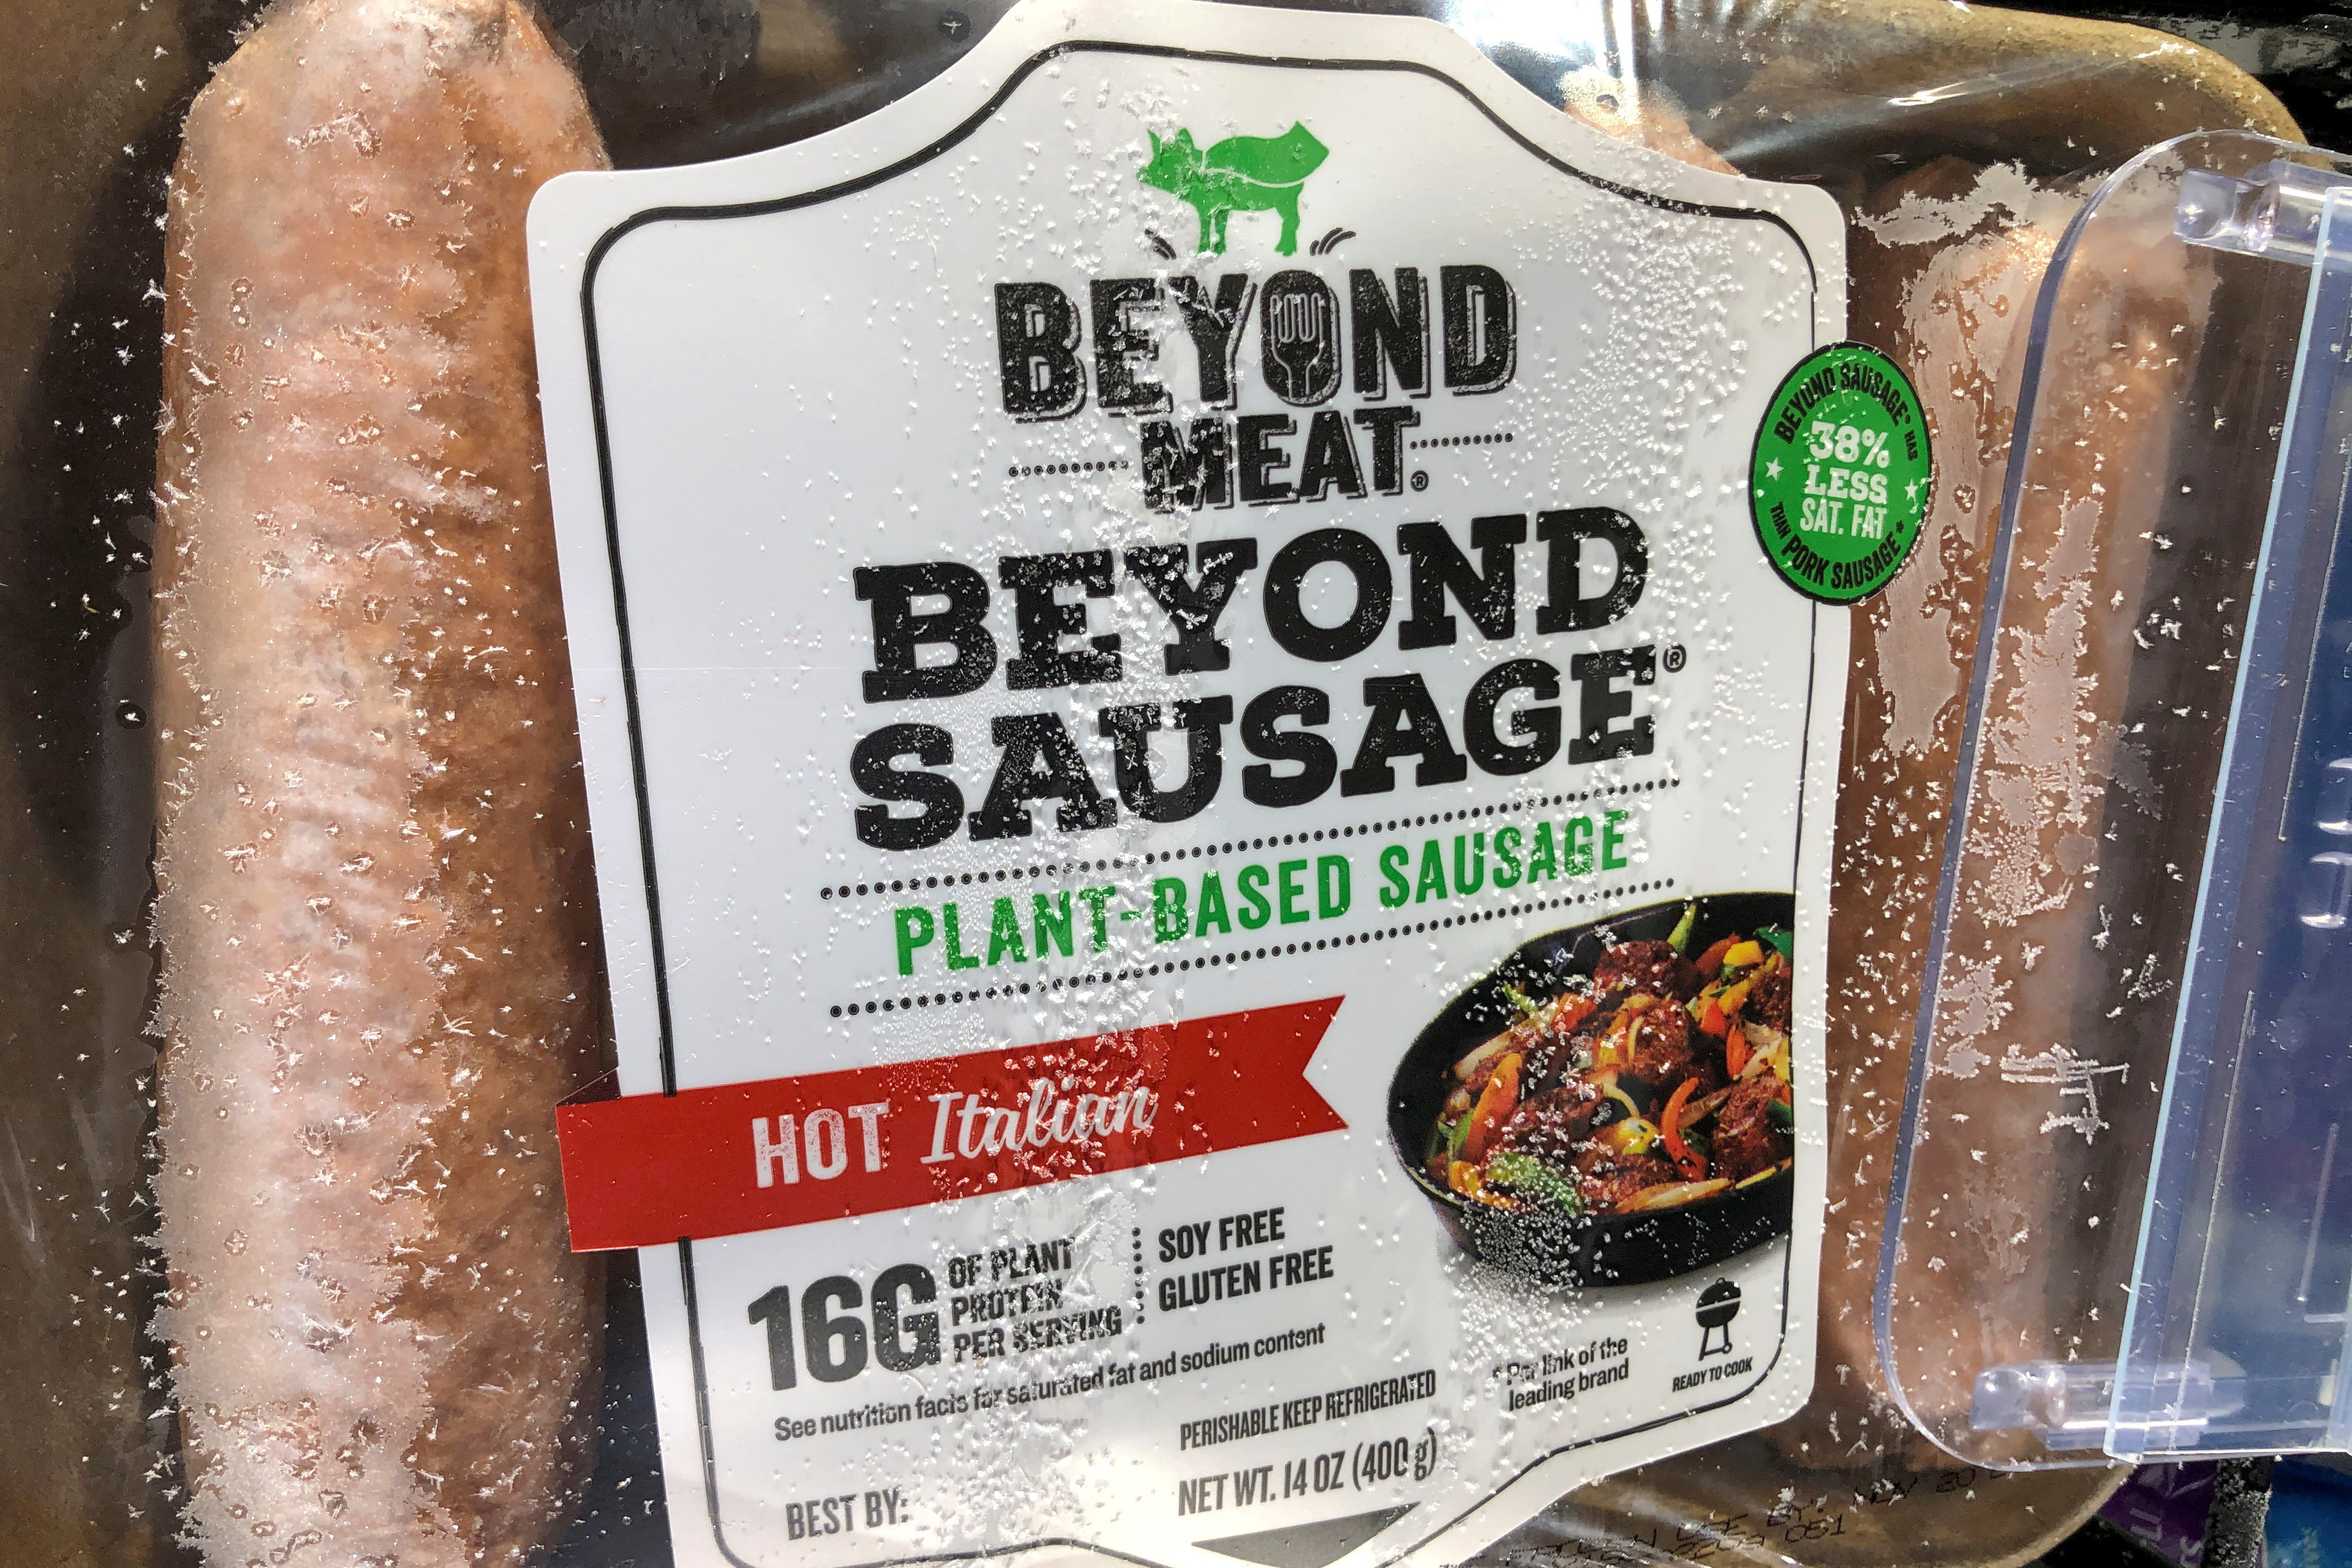 Vegetarian sausages from Beyond Meat Inc, the vegan burger maker, are shown for sale at a market in Encinitas, California